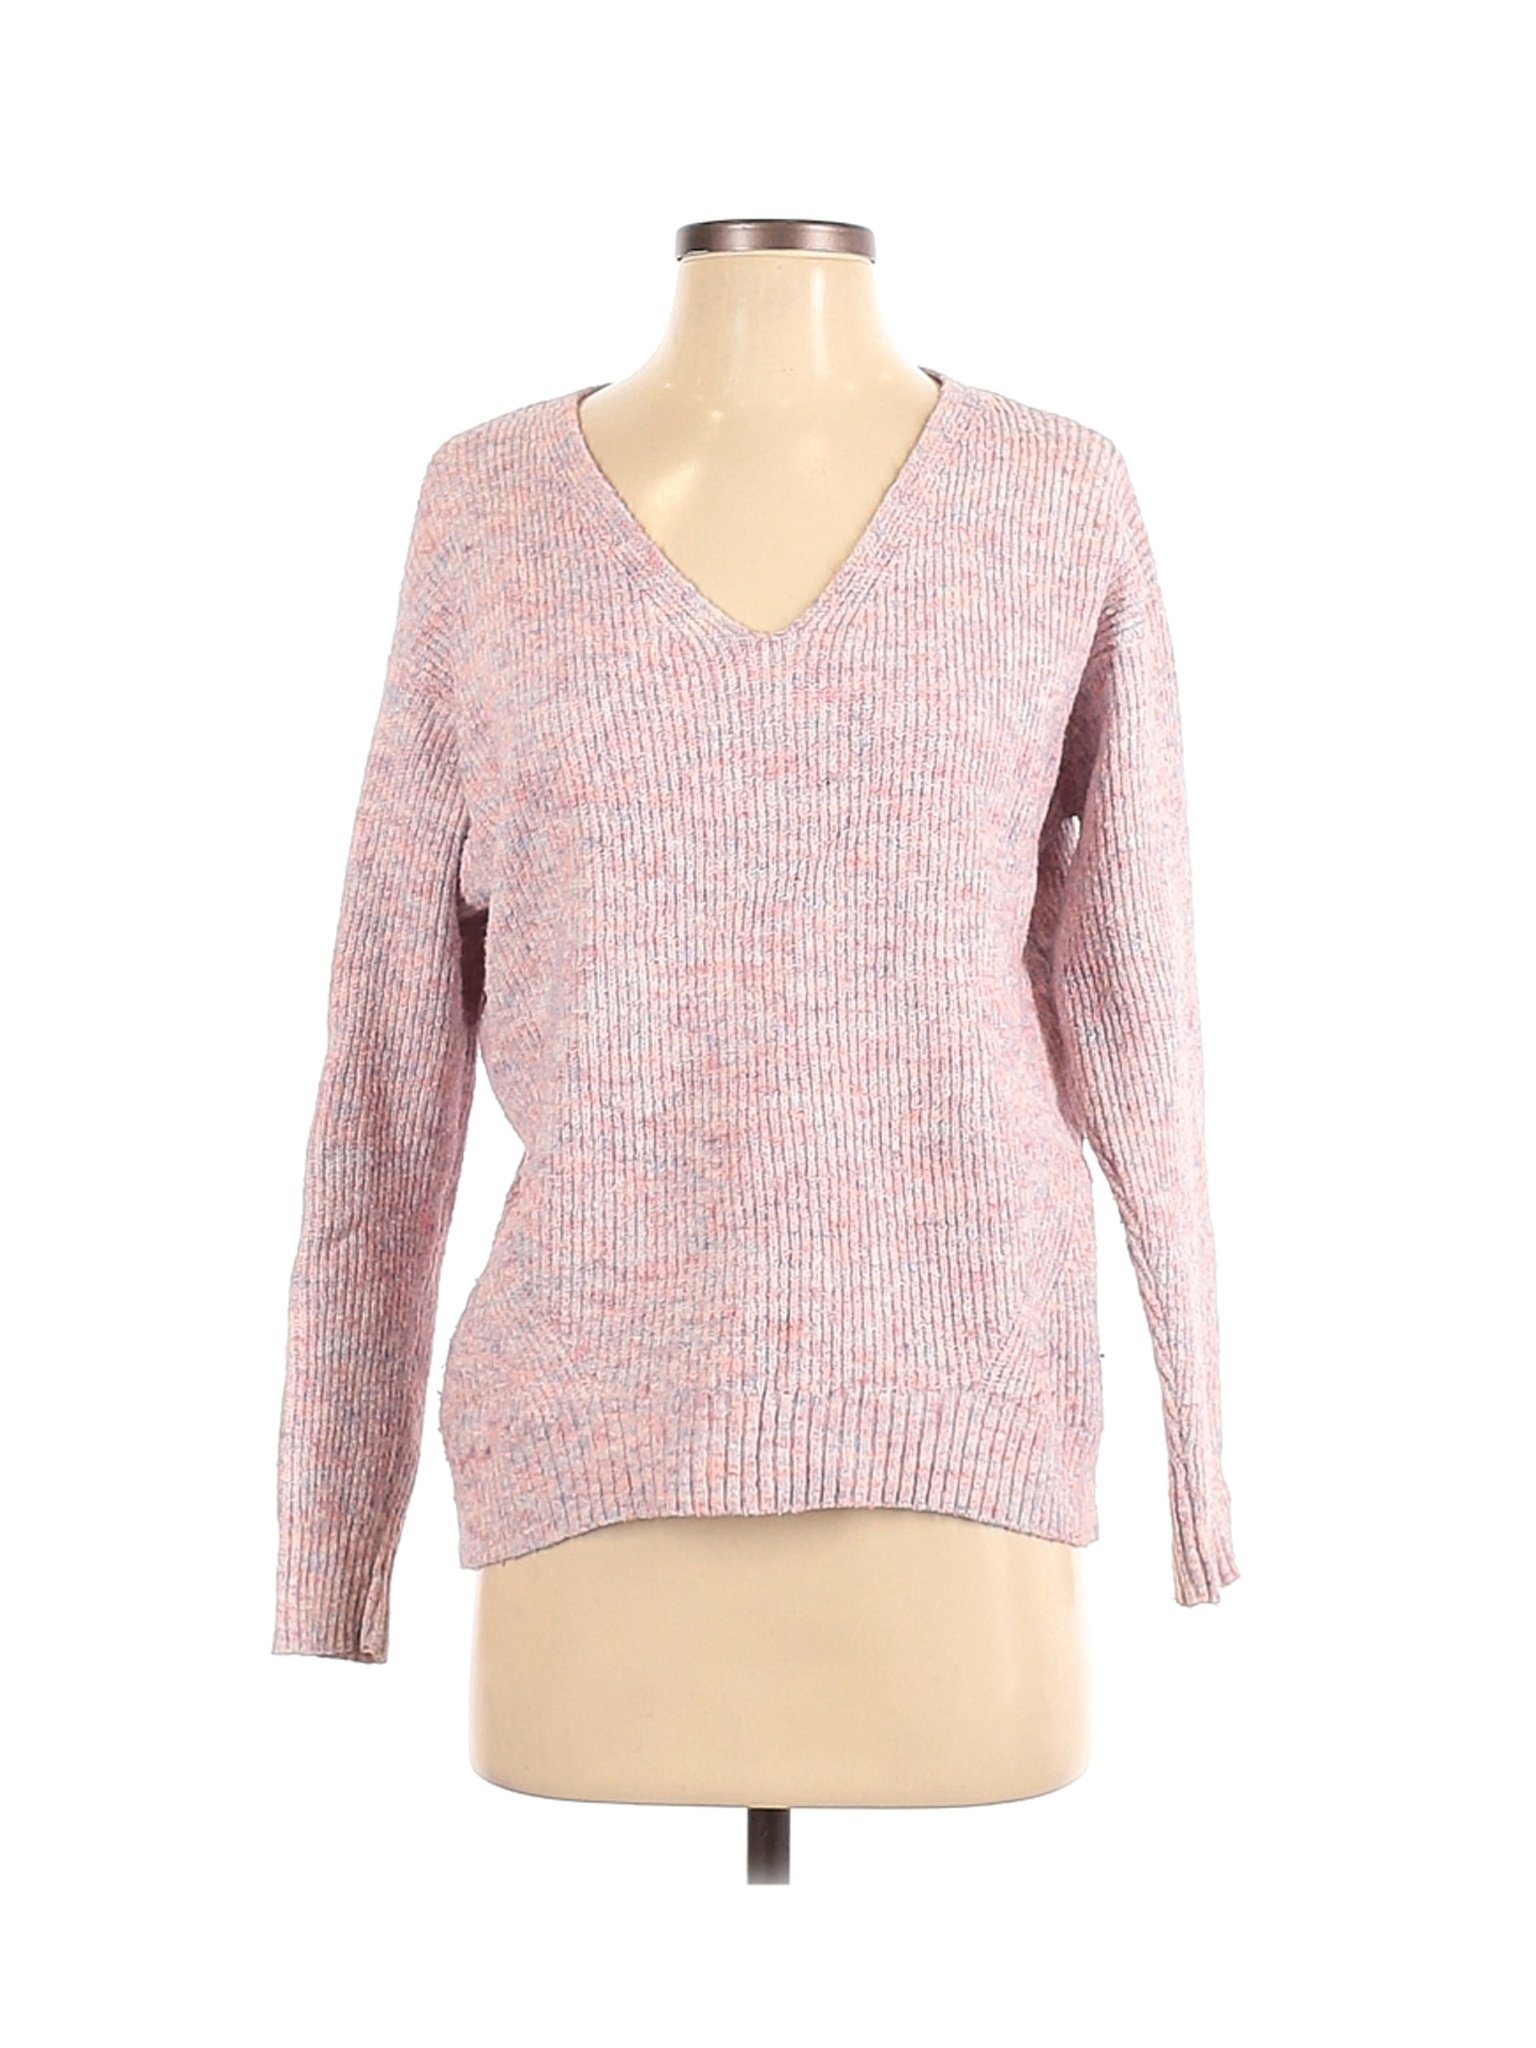 Old Navy Women Pink Pullover Sweater S | eBay